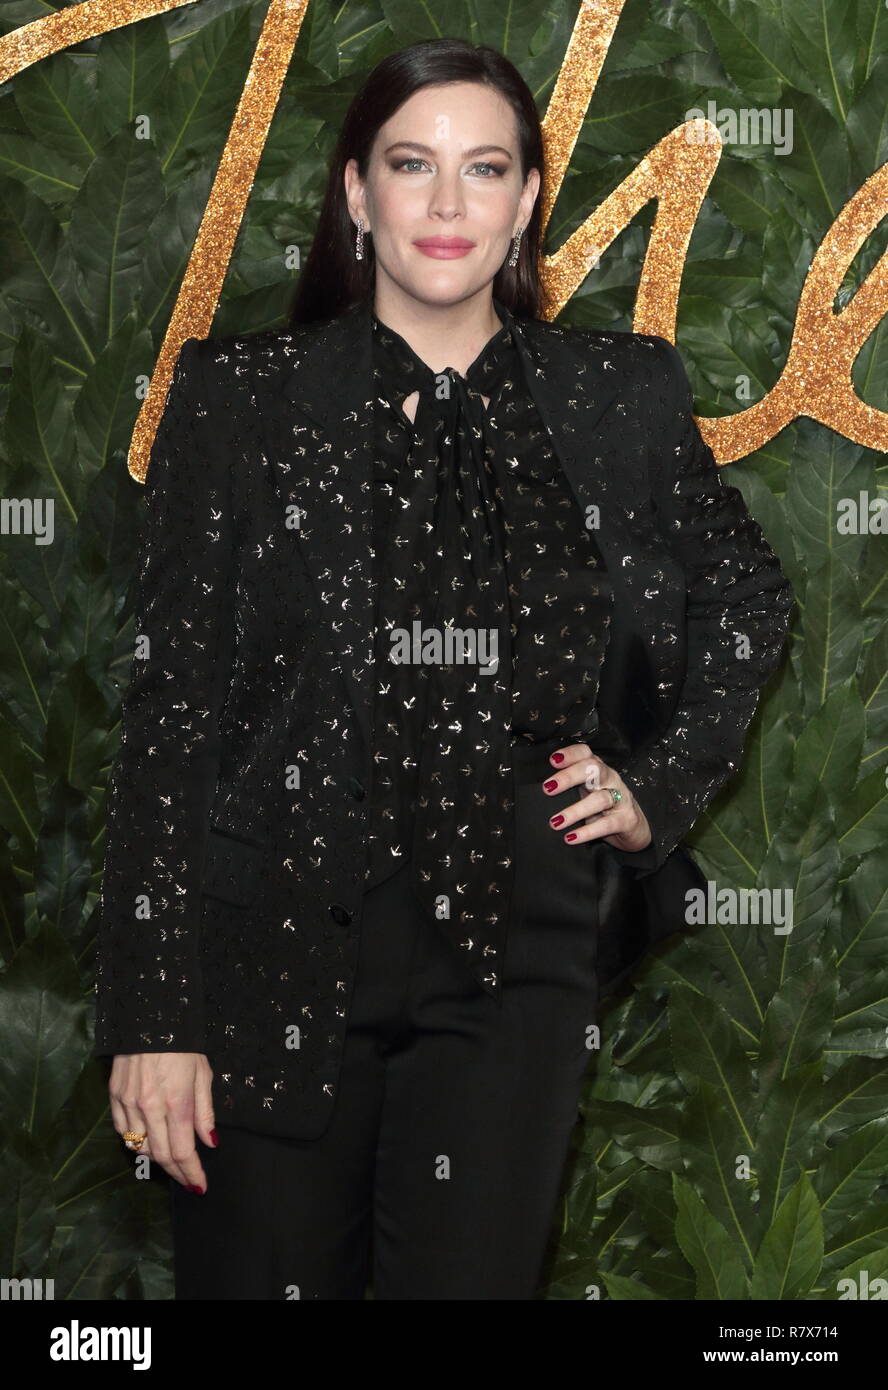 Liv Tyler seen on the red carpet during the Fashion Awards 2018 at the Royal Albert Hall, Kensington in London. Stock Photo